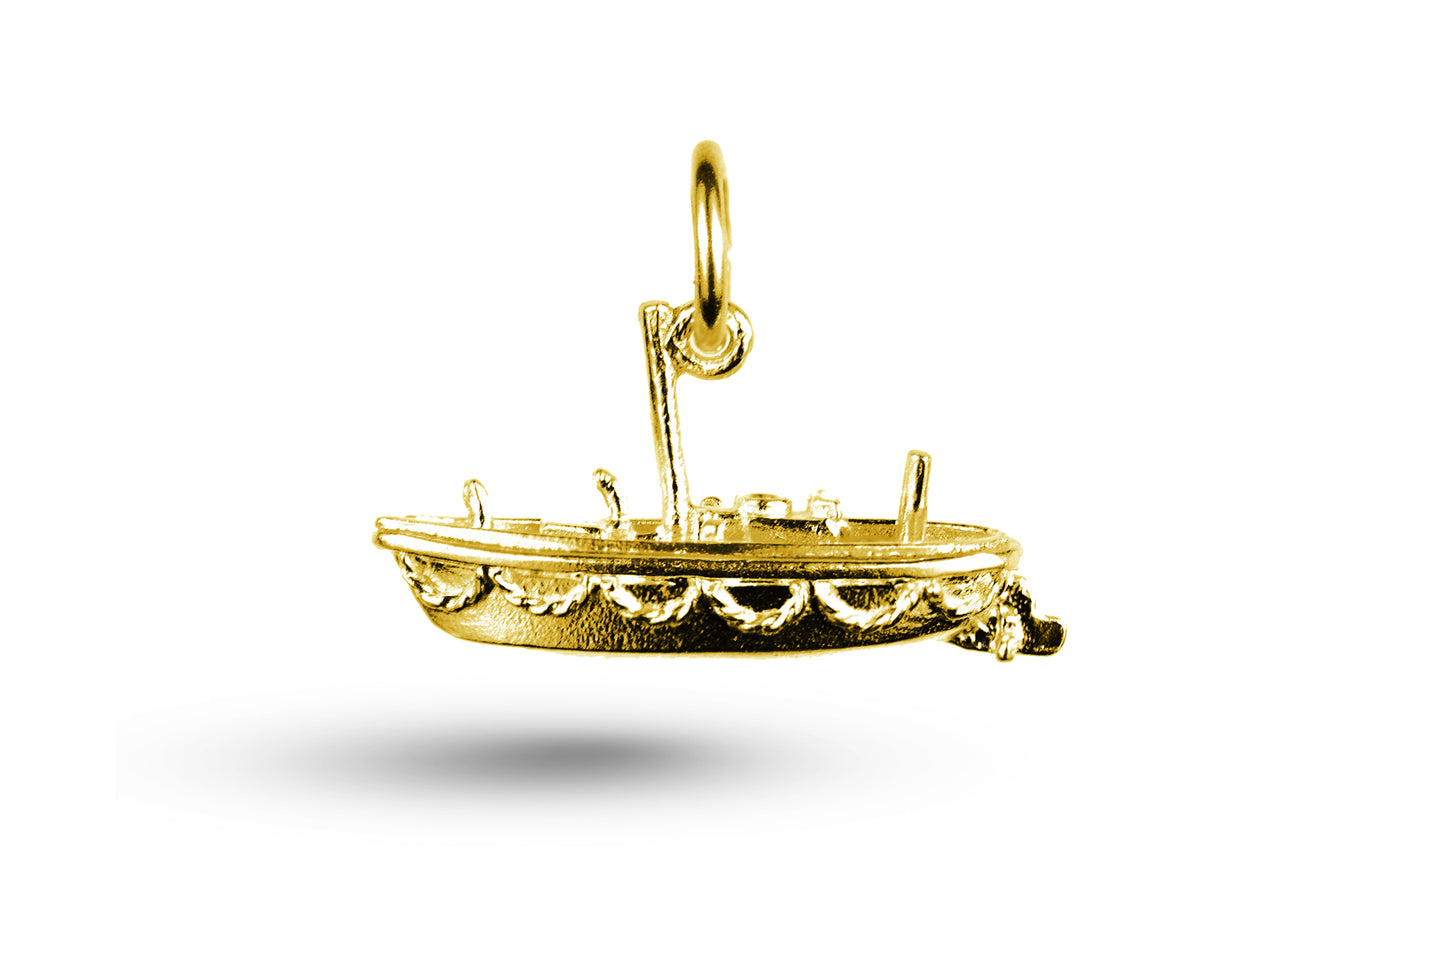 Yellow gold Lifeboat charm.